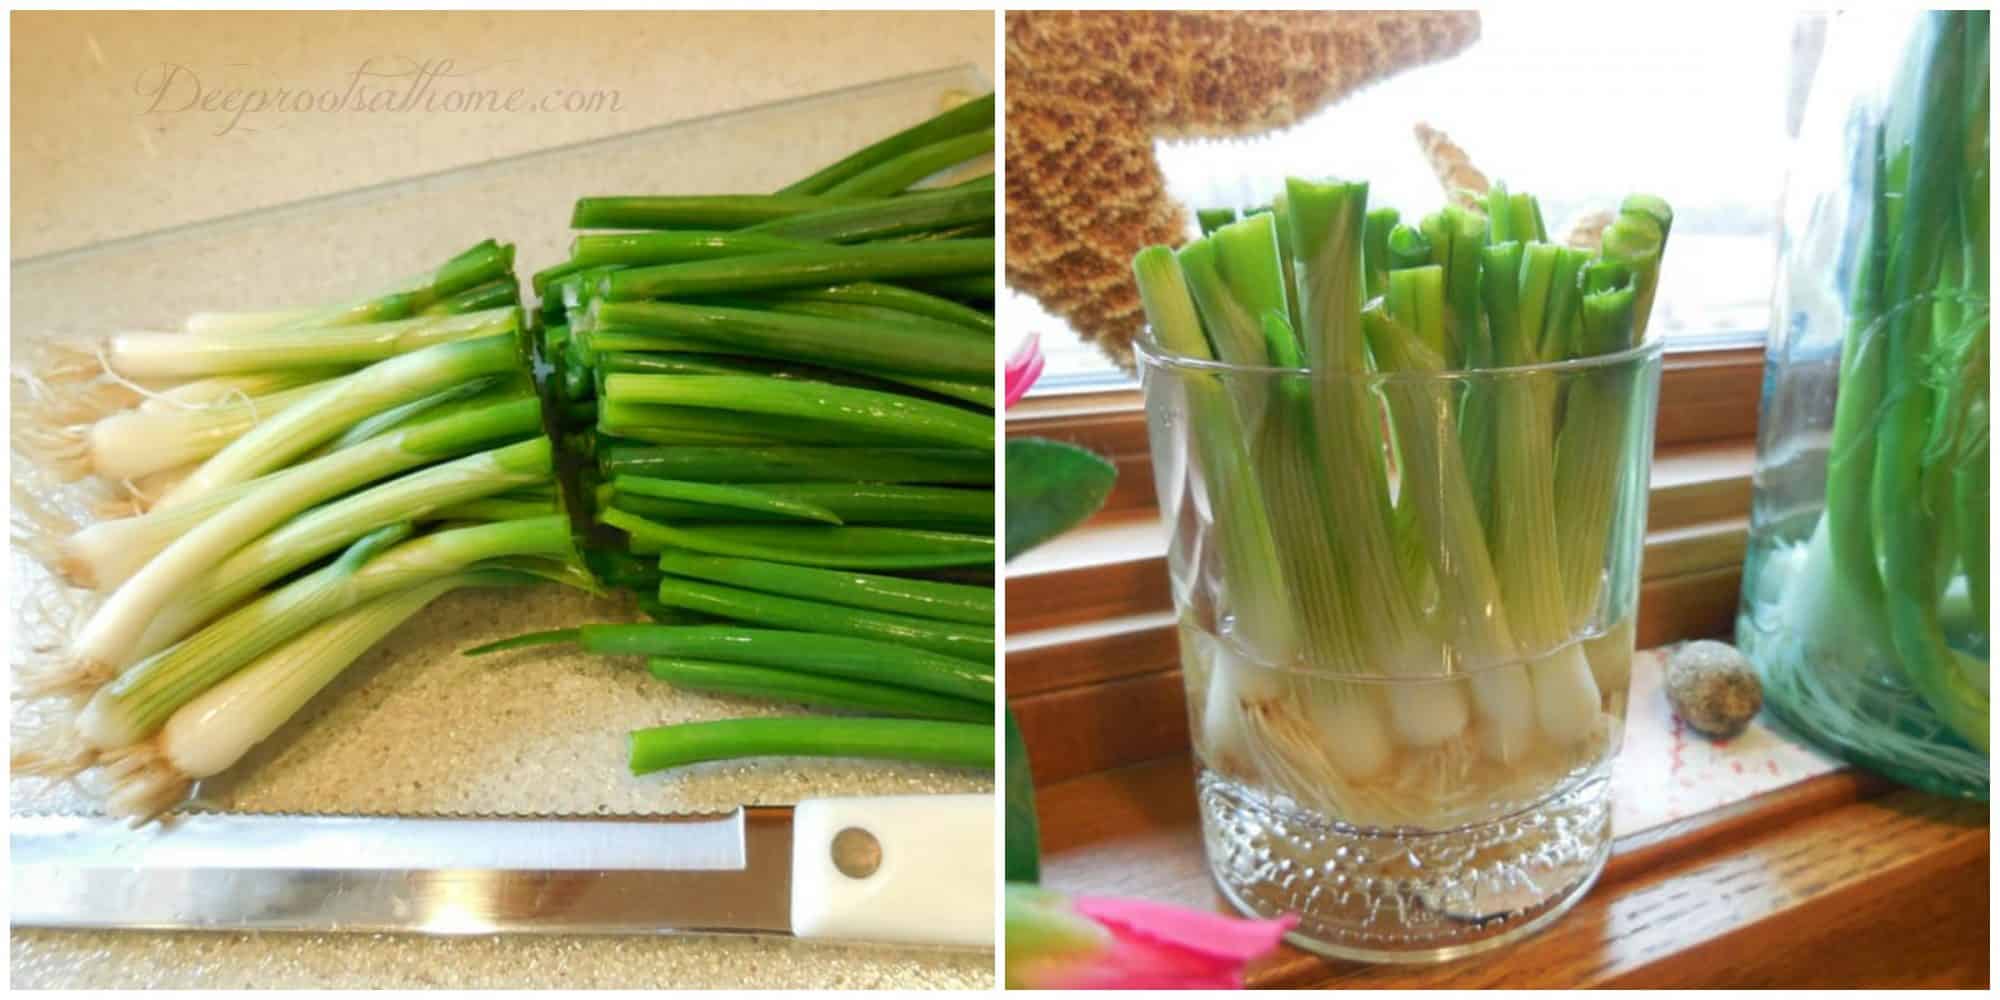 Growing Green Onions On Your Windowsill Couldn't Be Easier. cut onions and gr onions in water growing roots